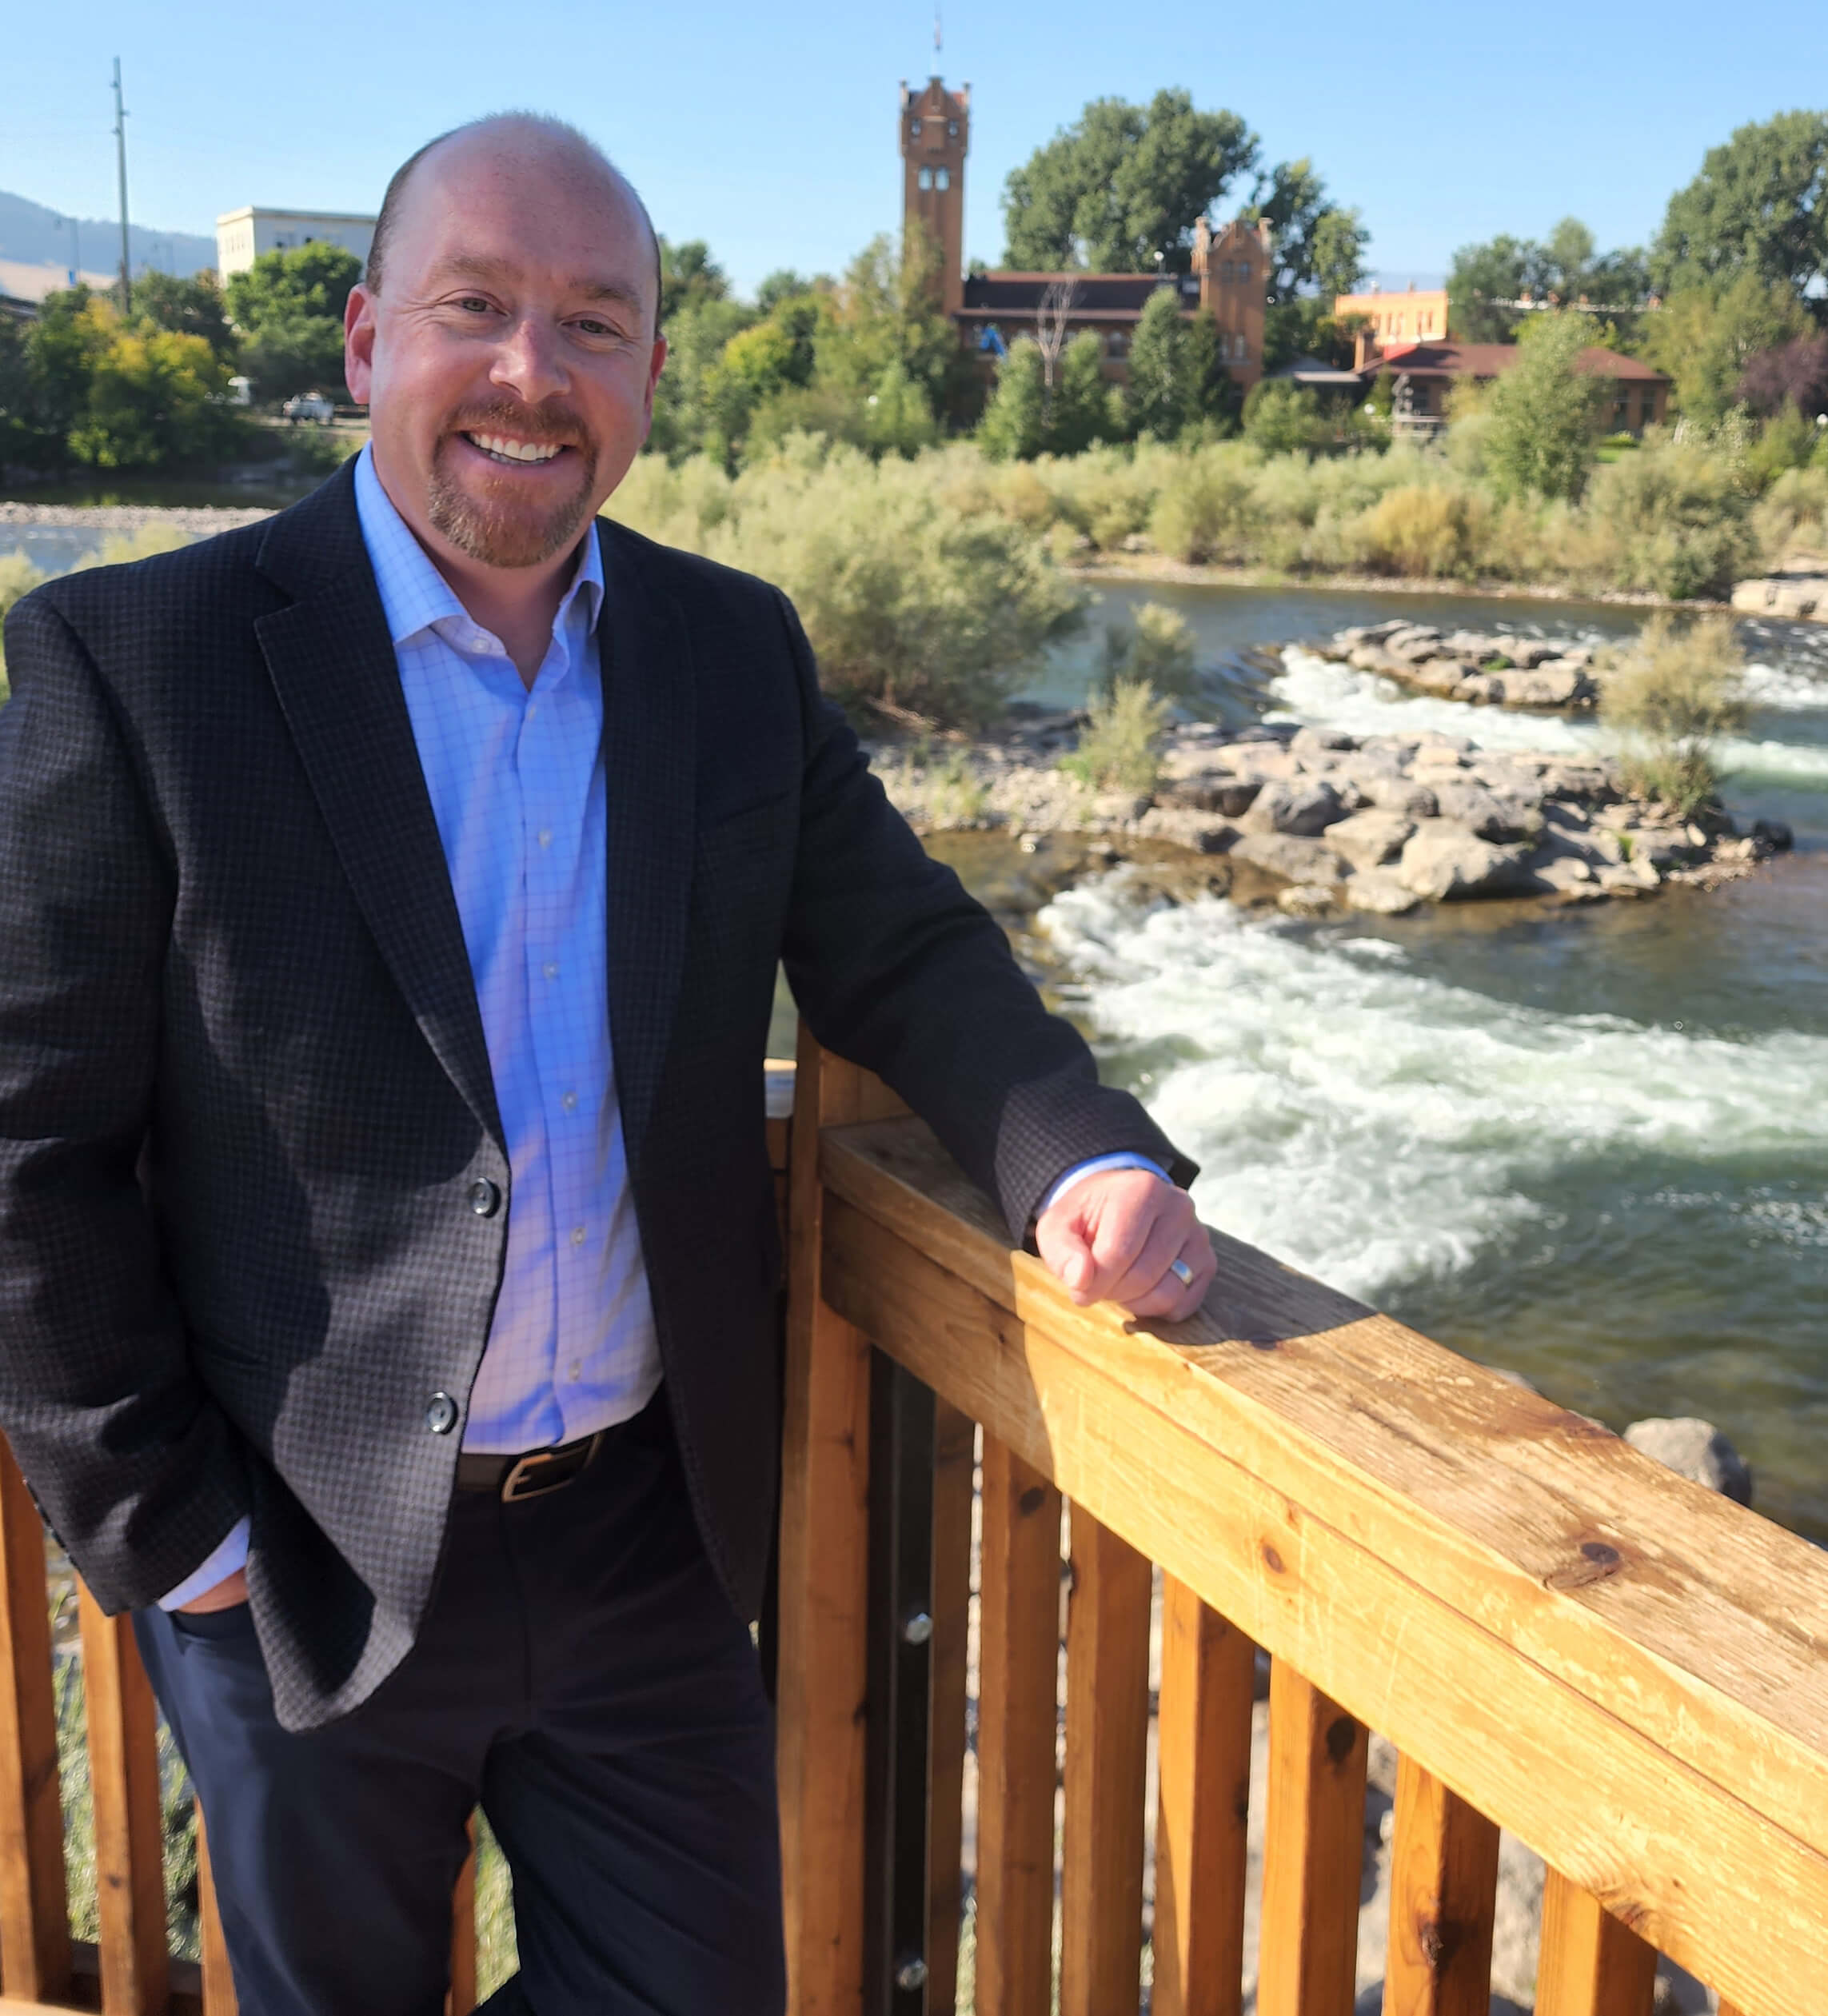 Adam McQuiston, President and CEO of First Montana Bank